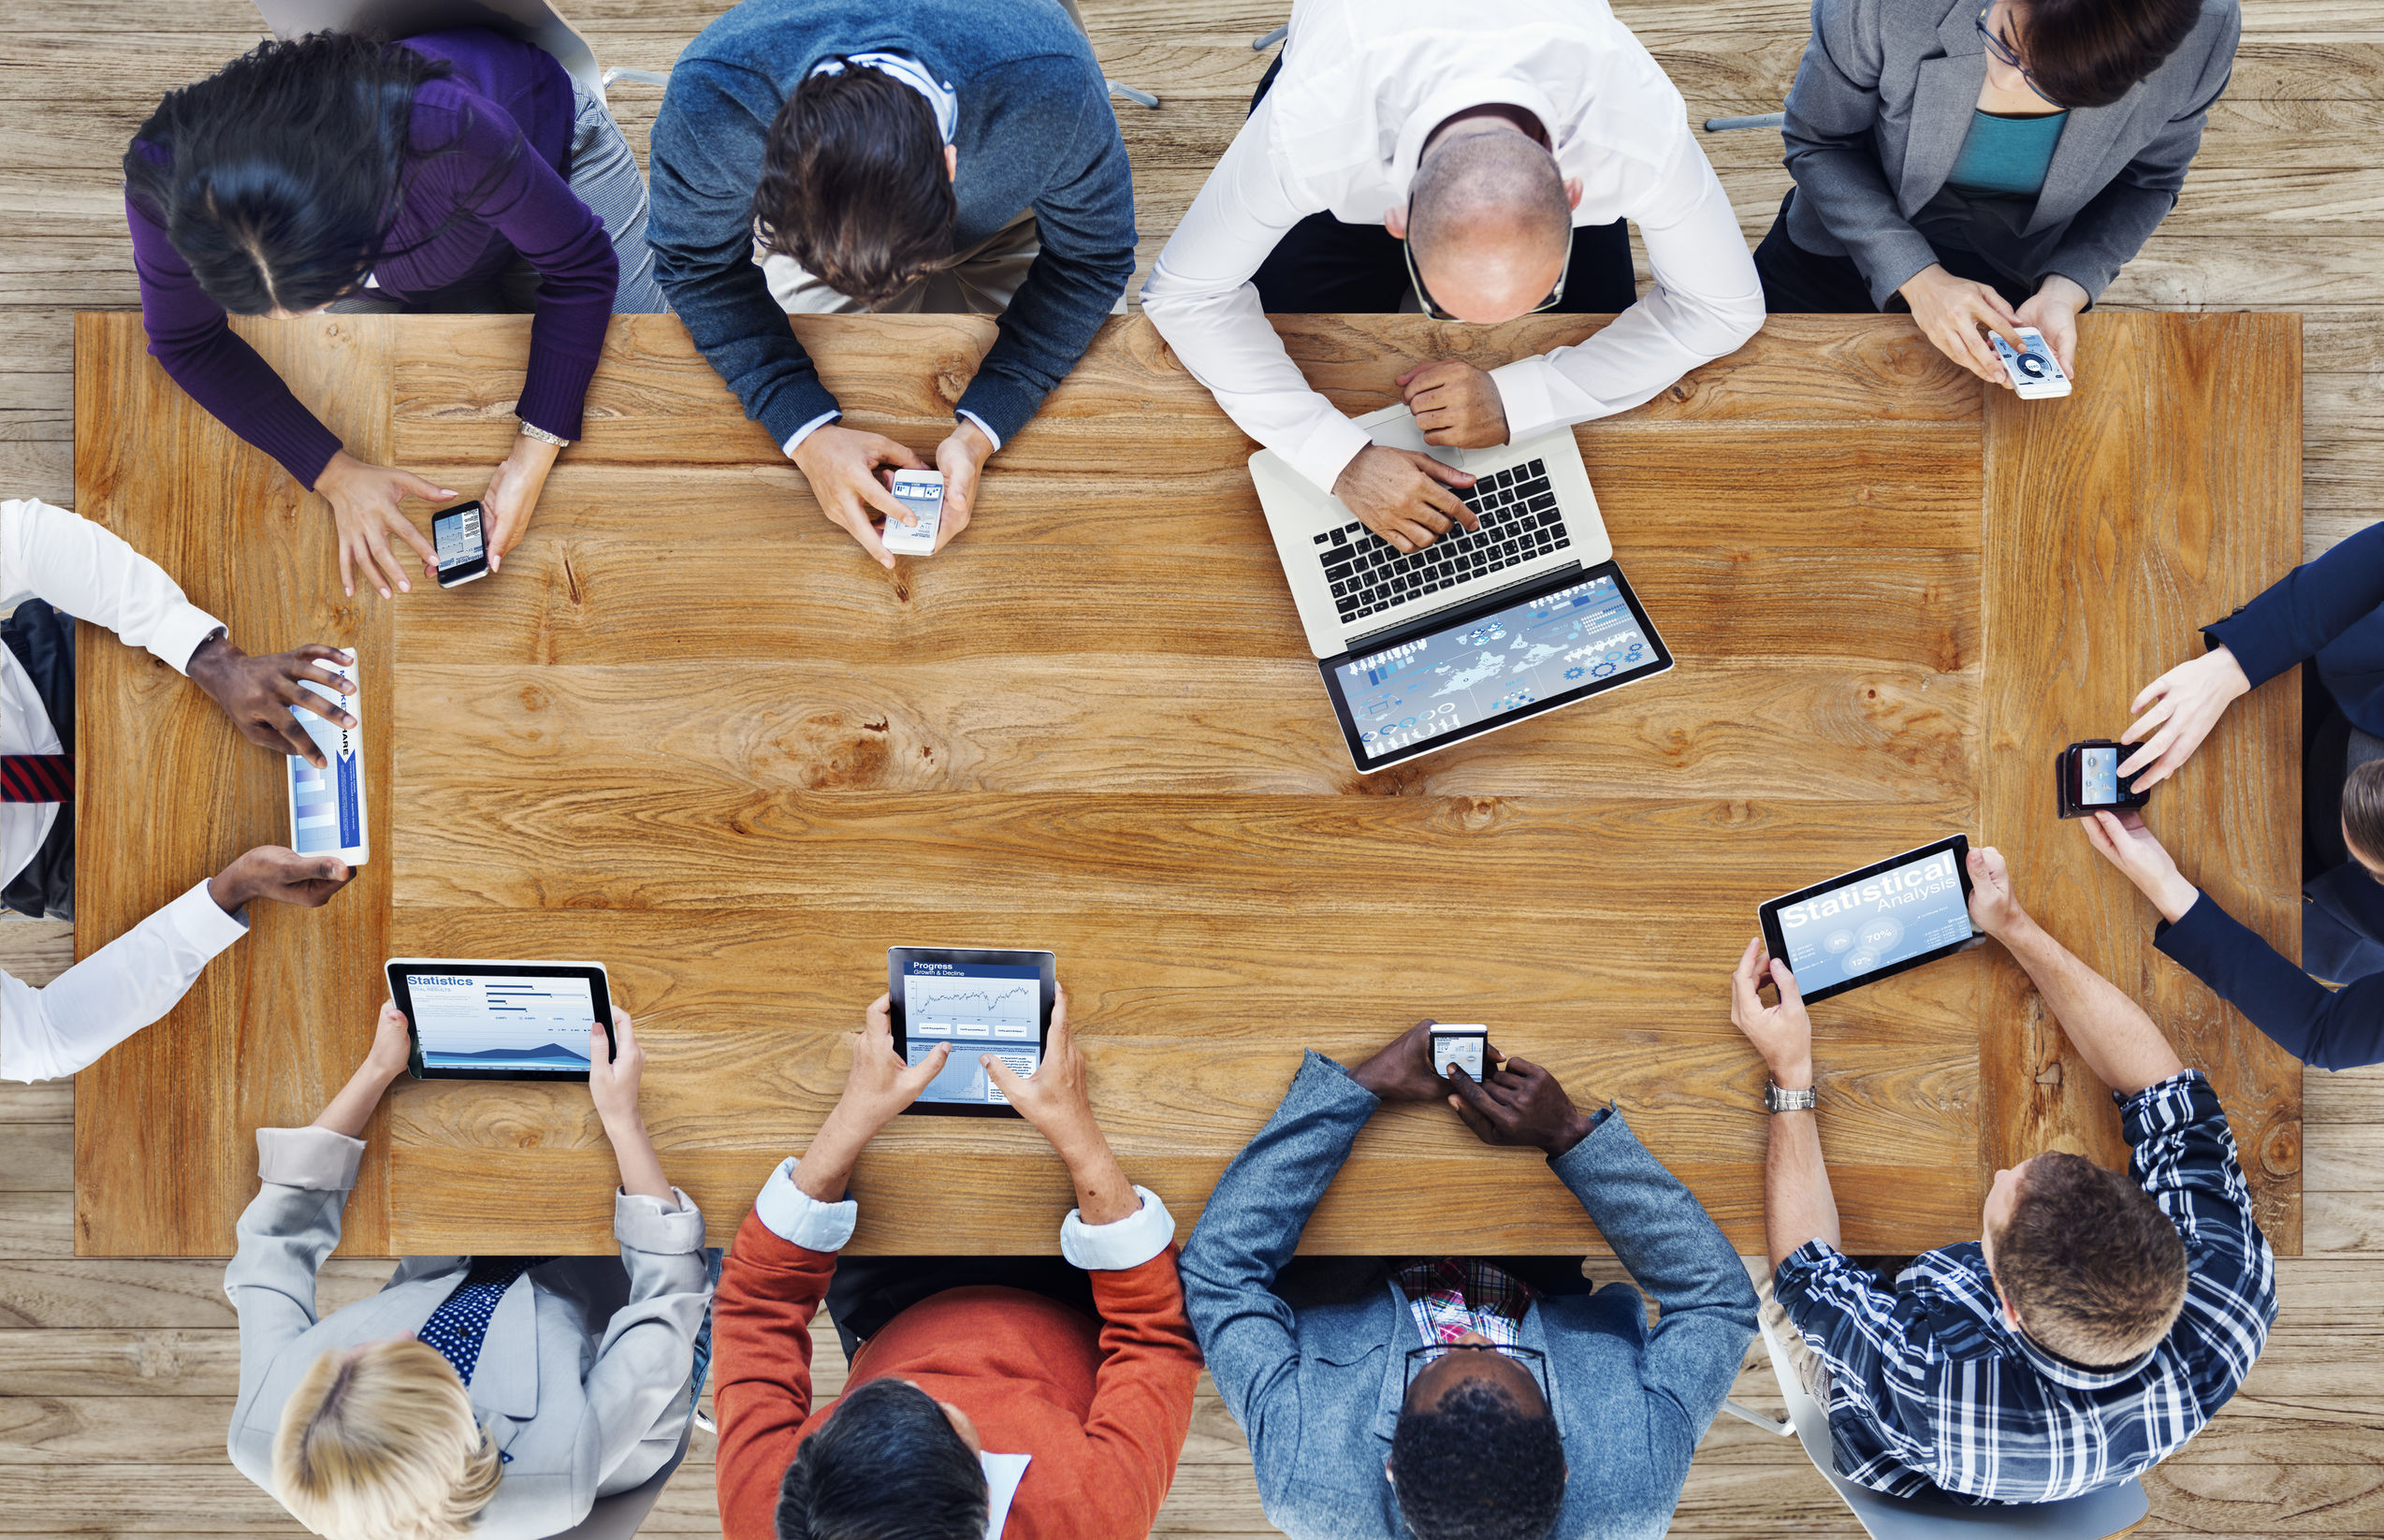 Group of business people using digital devices